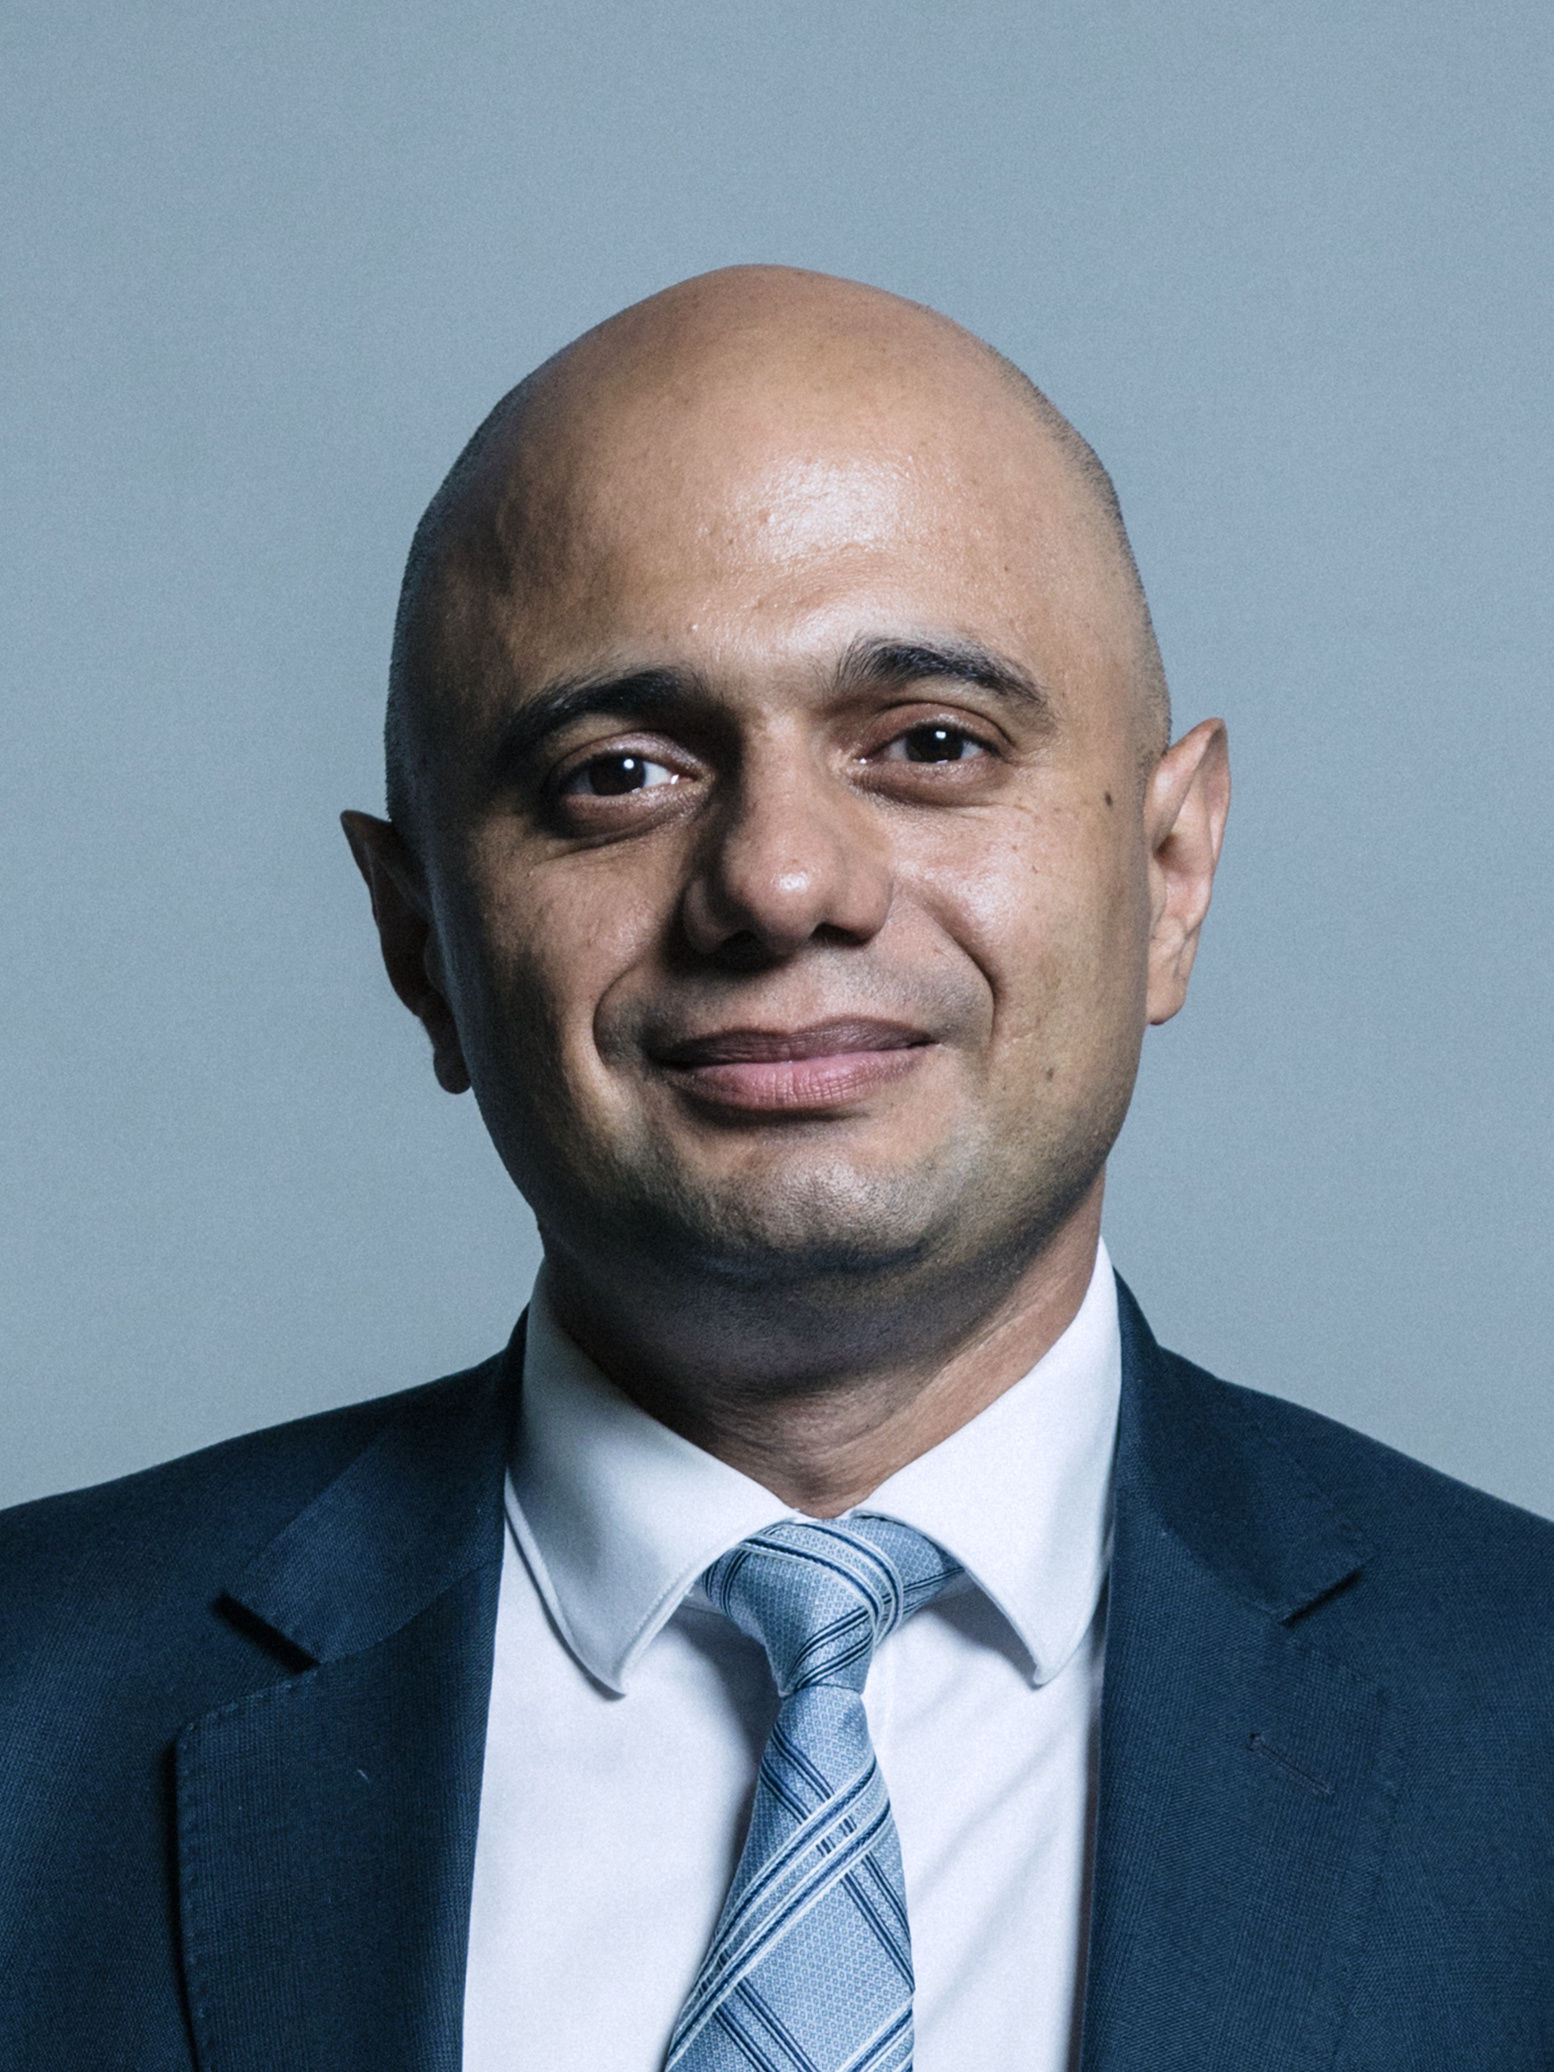 Britain Will Be Great After Brexit Says Sajid Javid As He Pledges Spending Review To Secure 8673